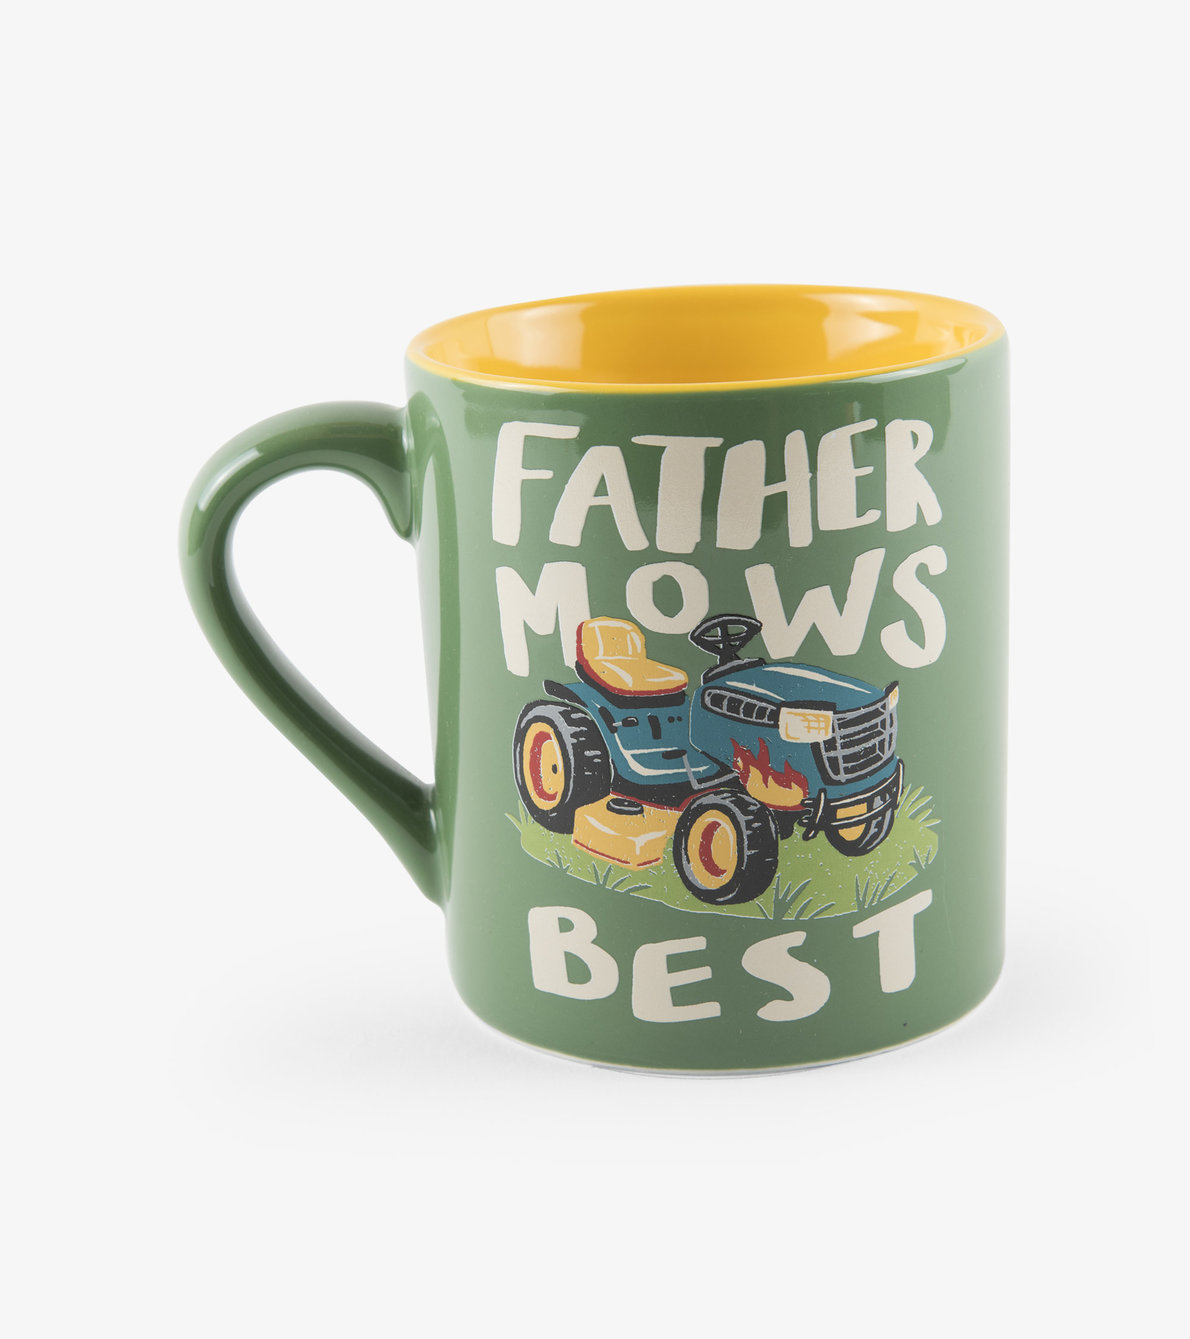 View larger image of Father Mows Best Ceramic Mug